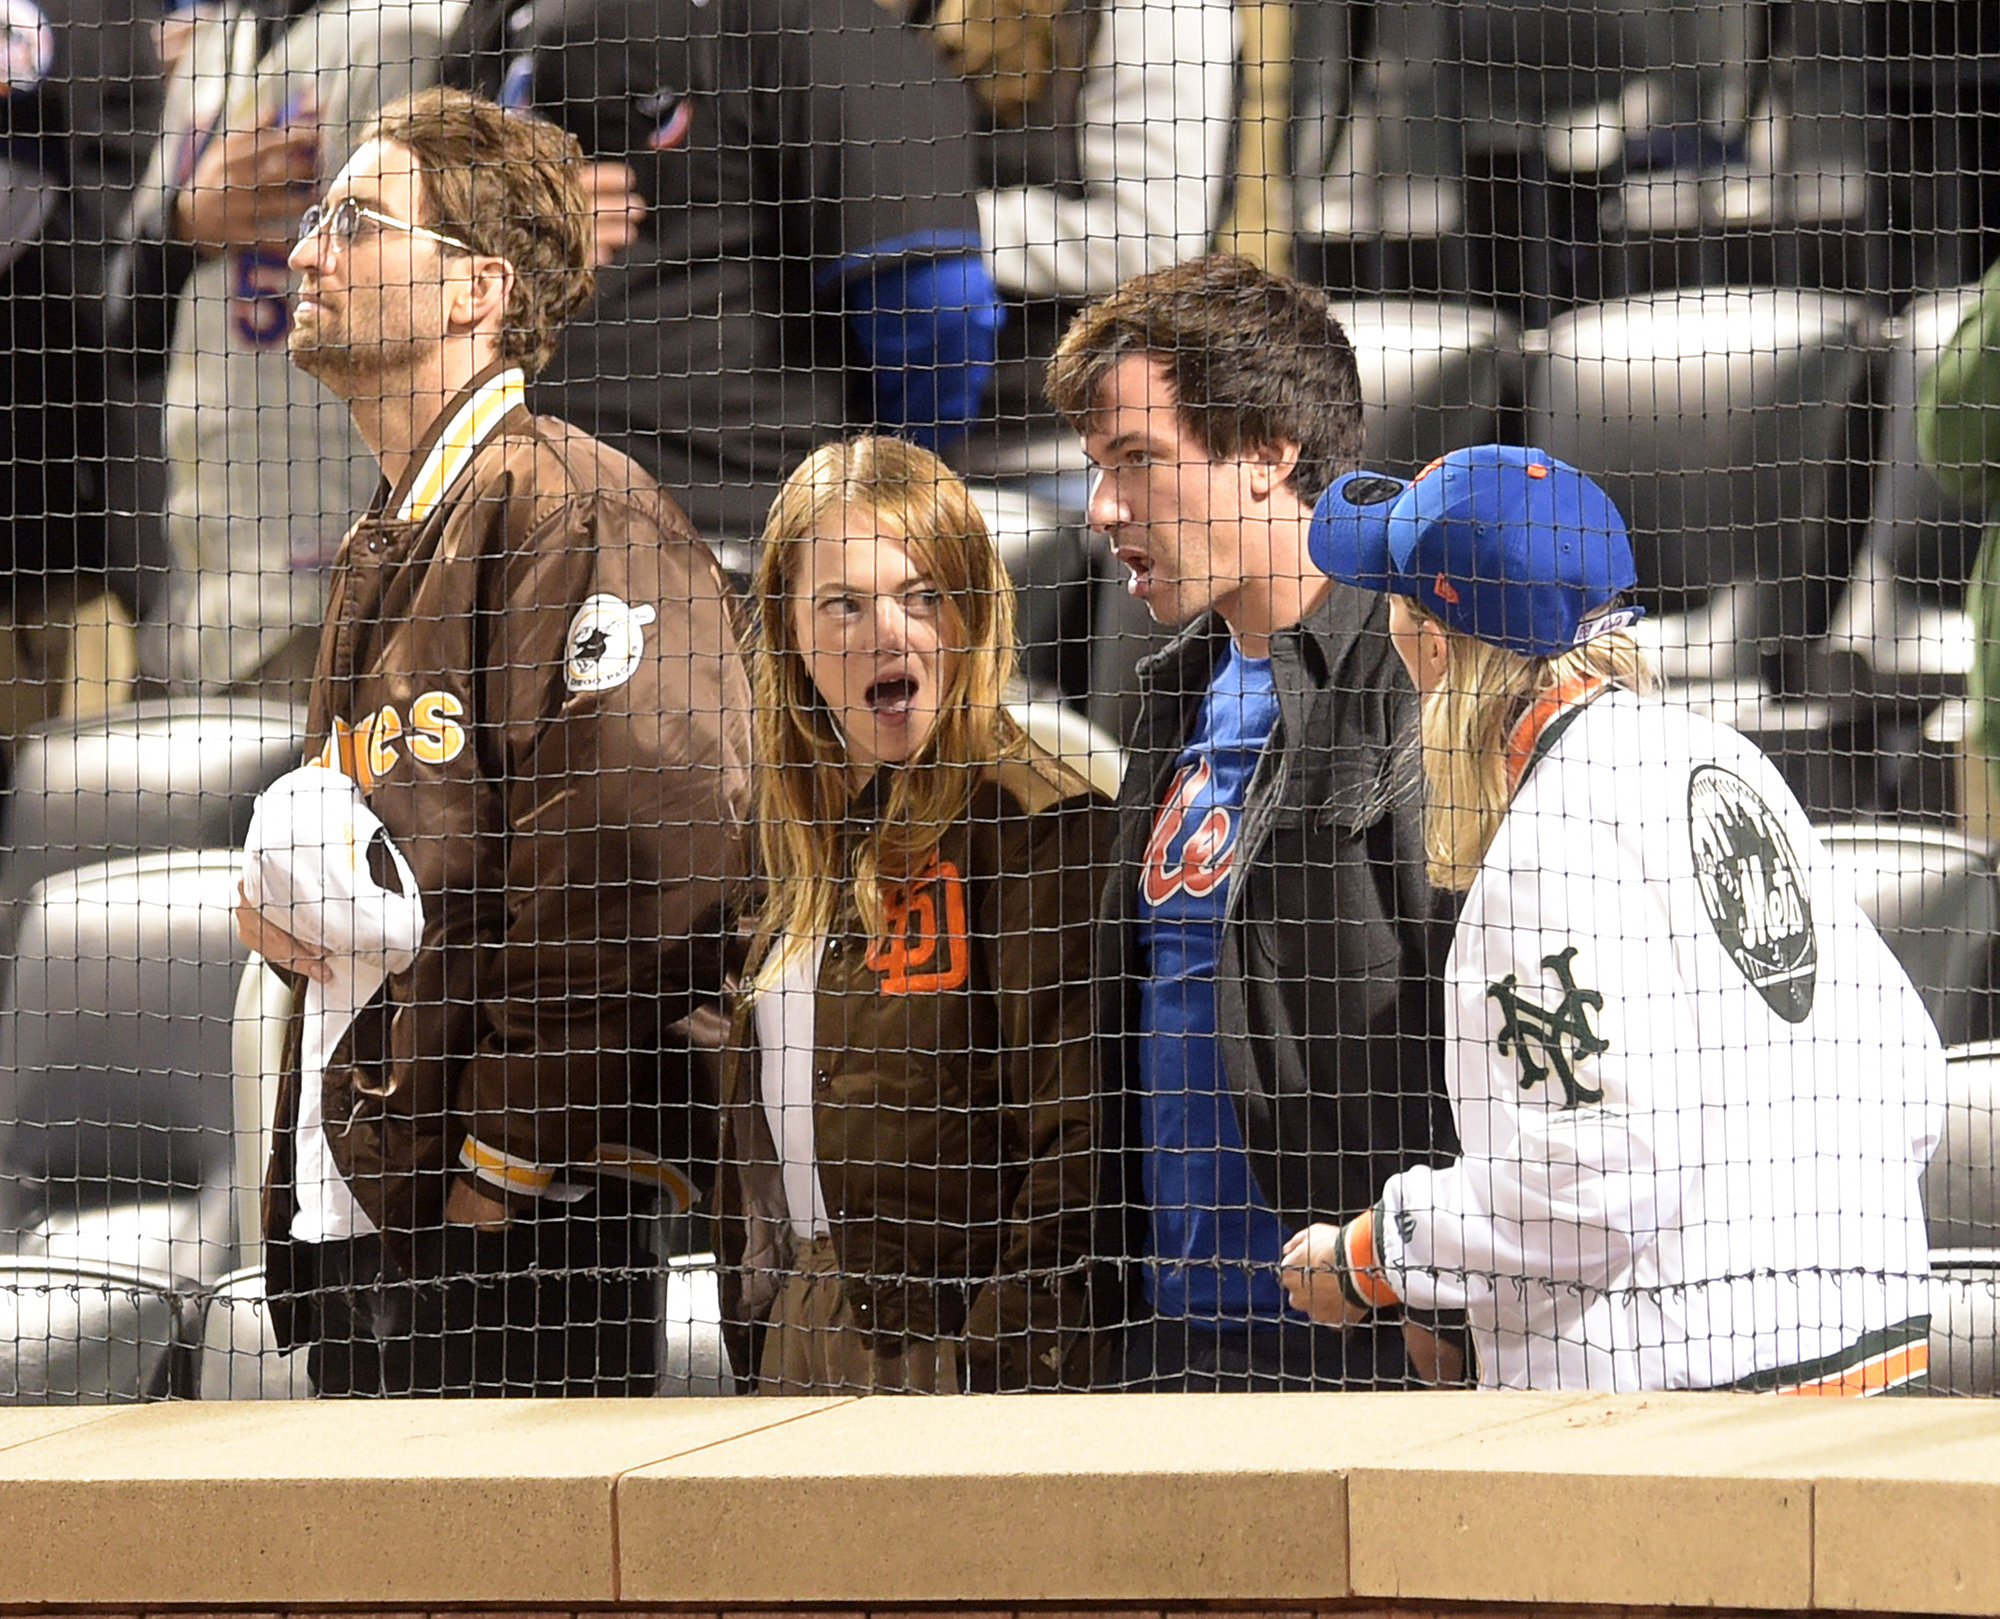 Emma Stone Reacts To Being Booed At Baseball Game